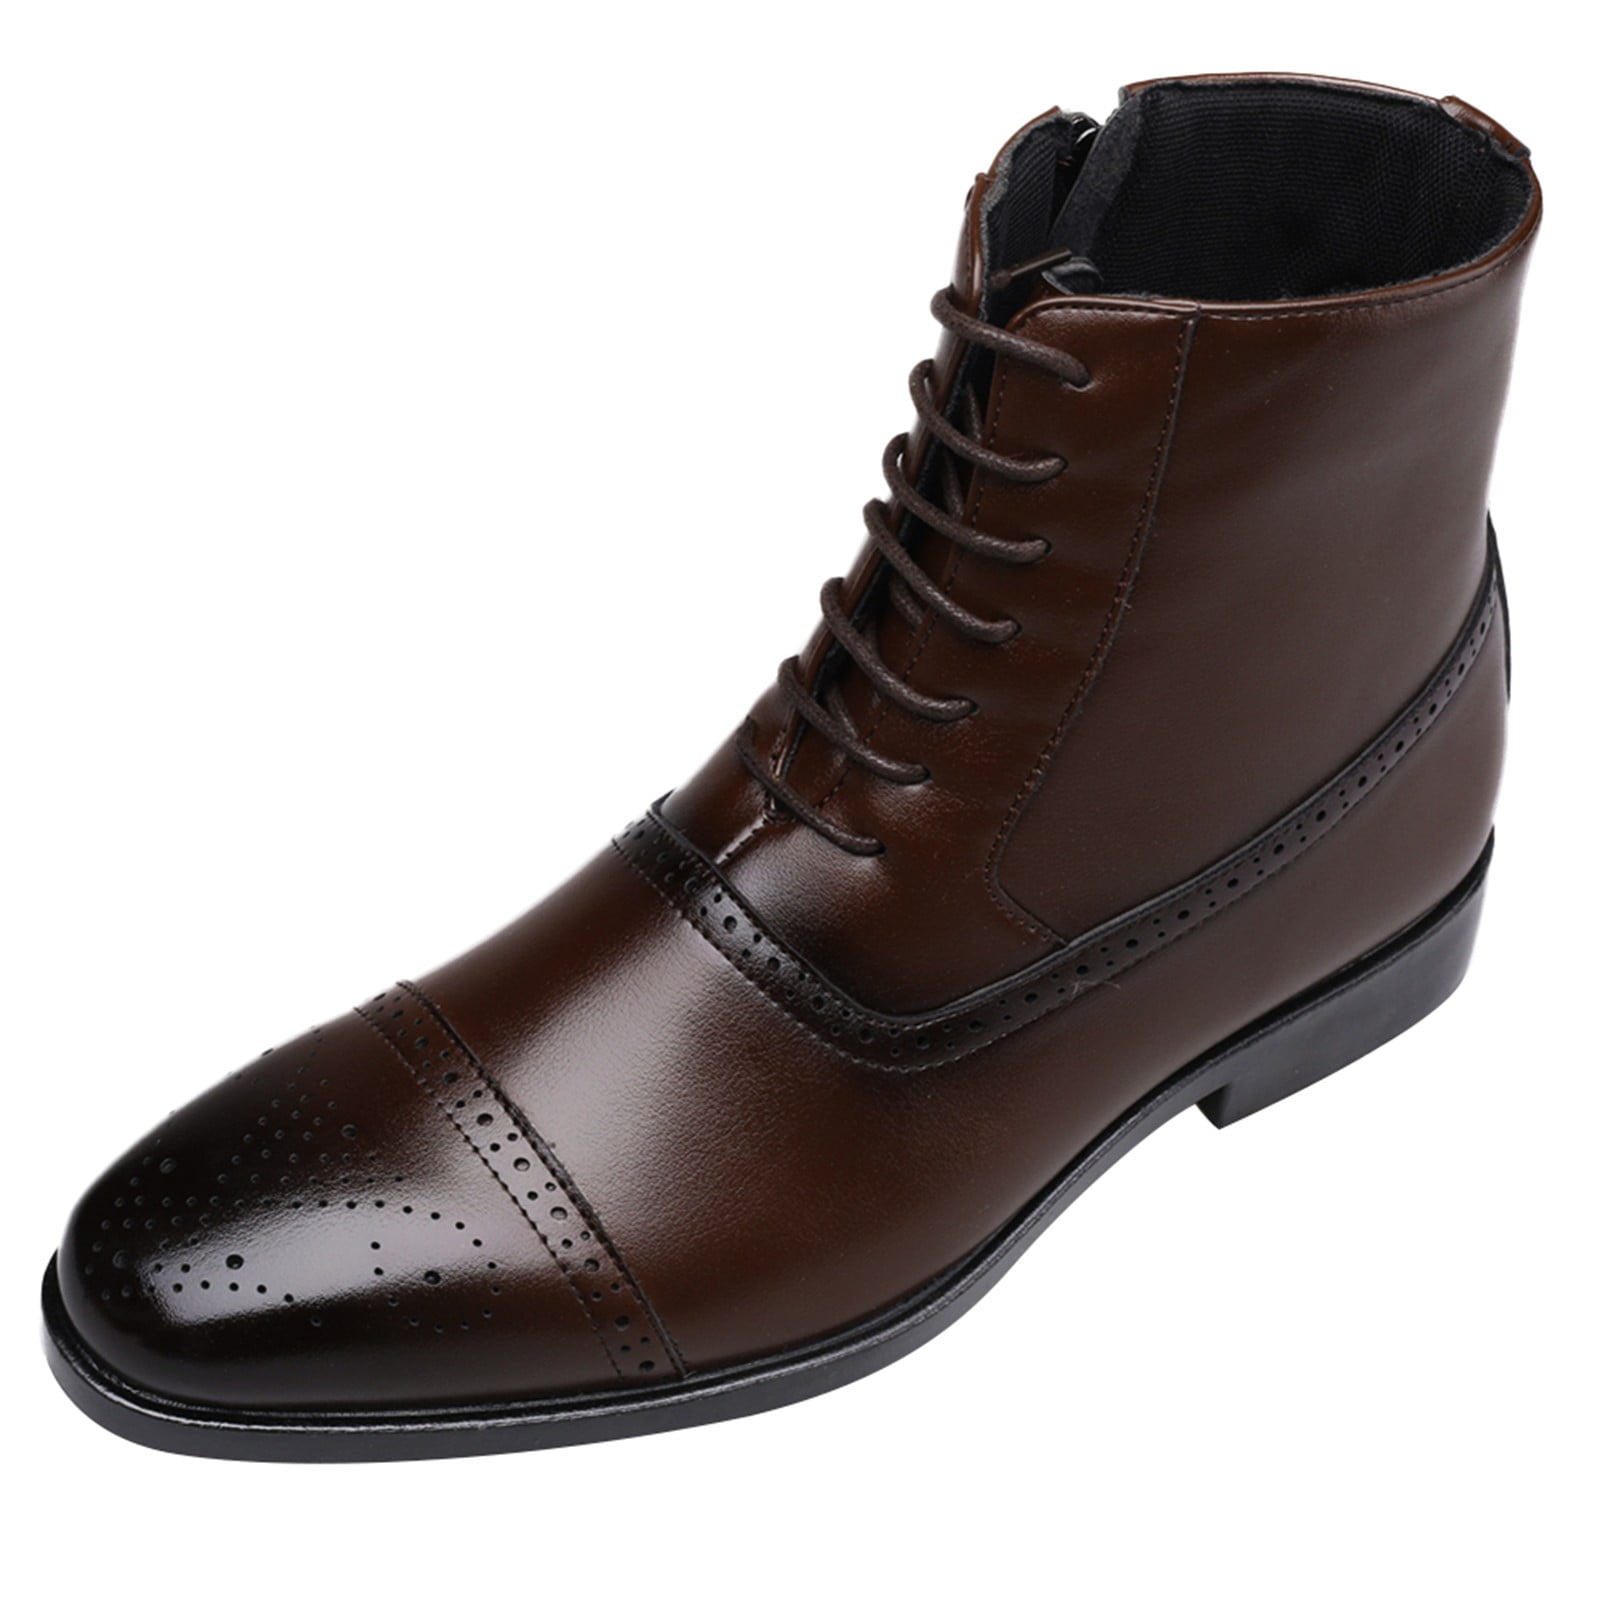 men’s dress shoes in wide sizes